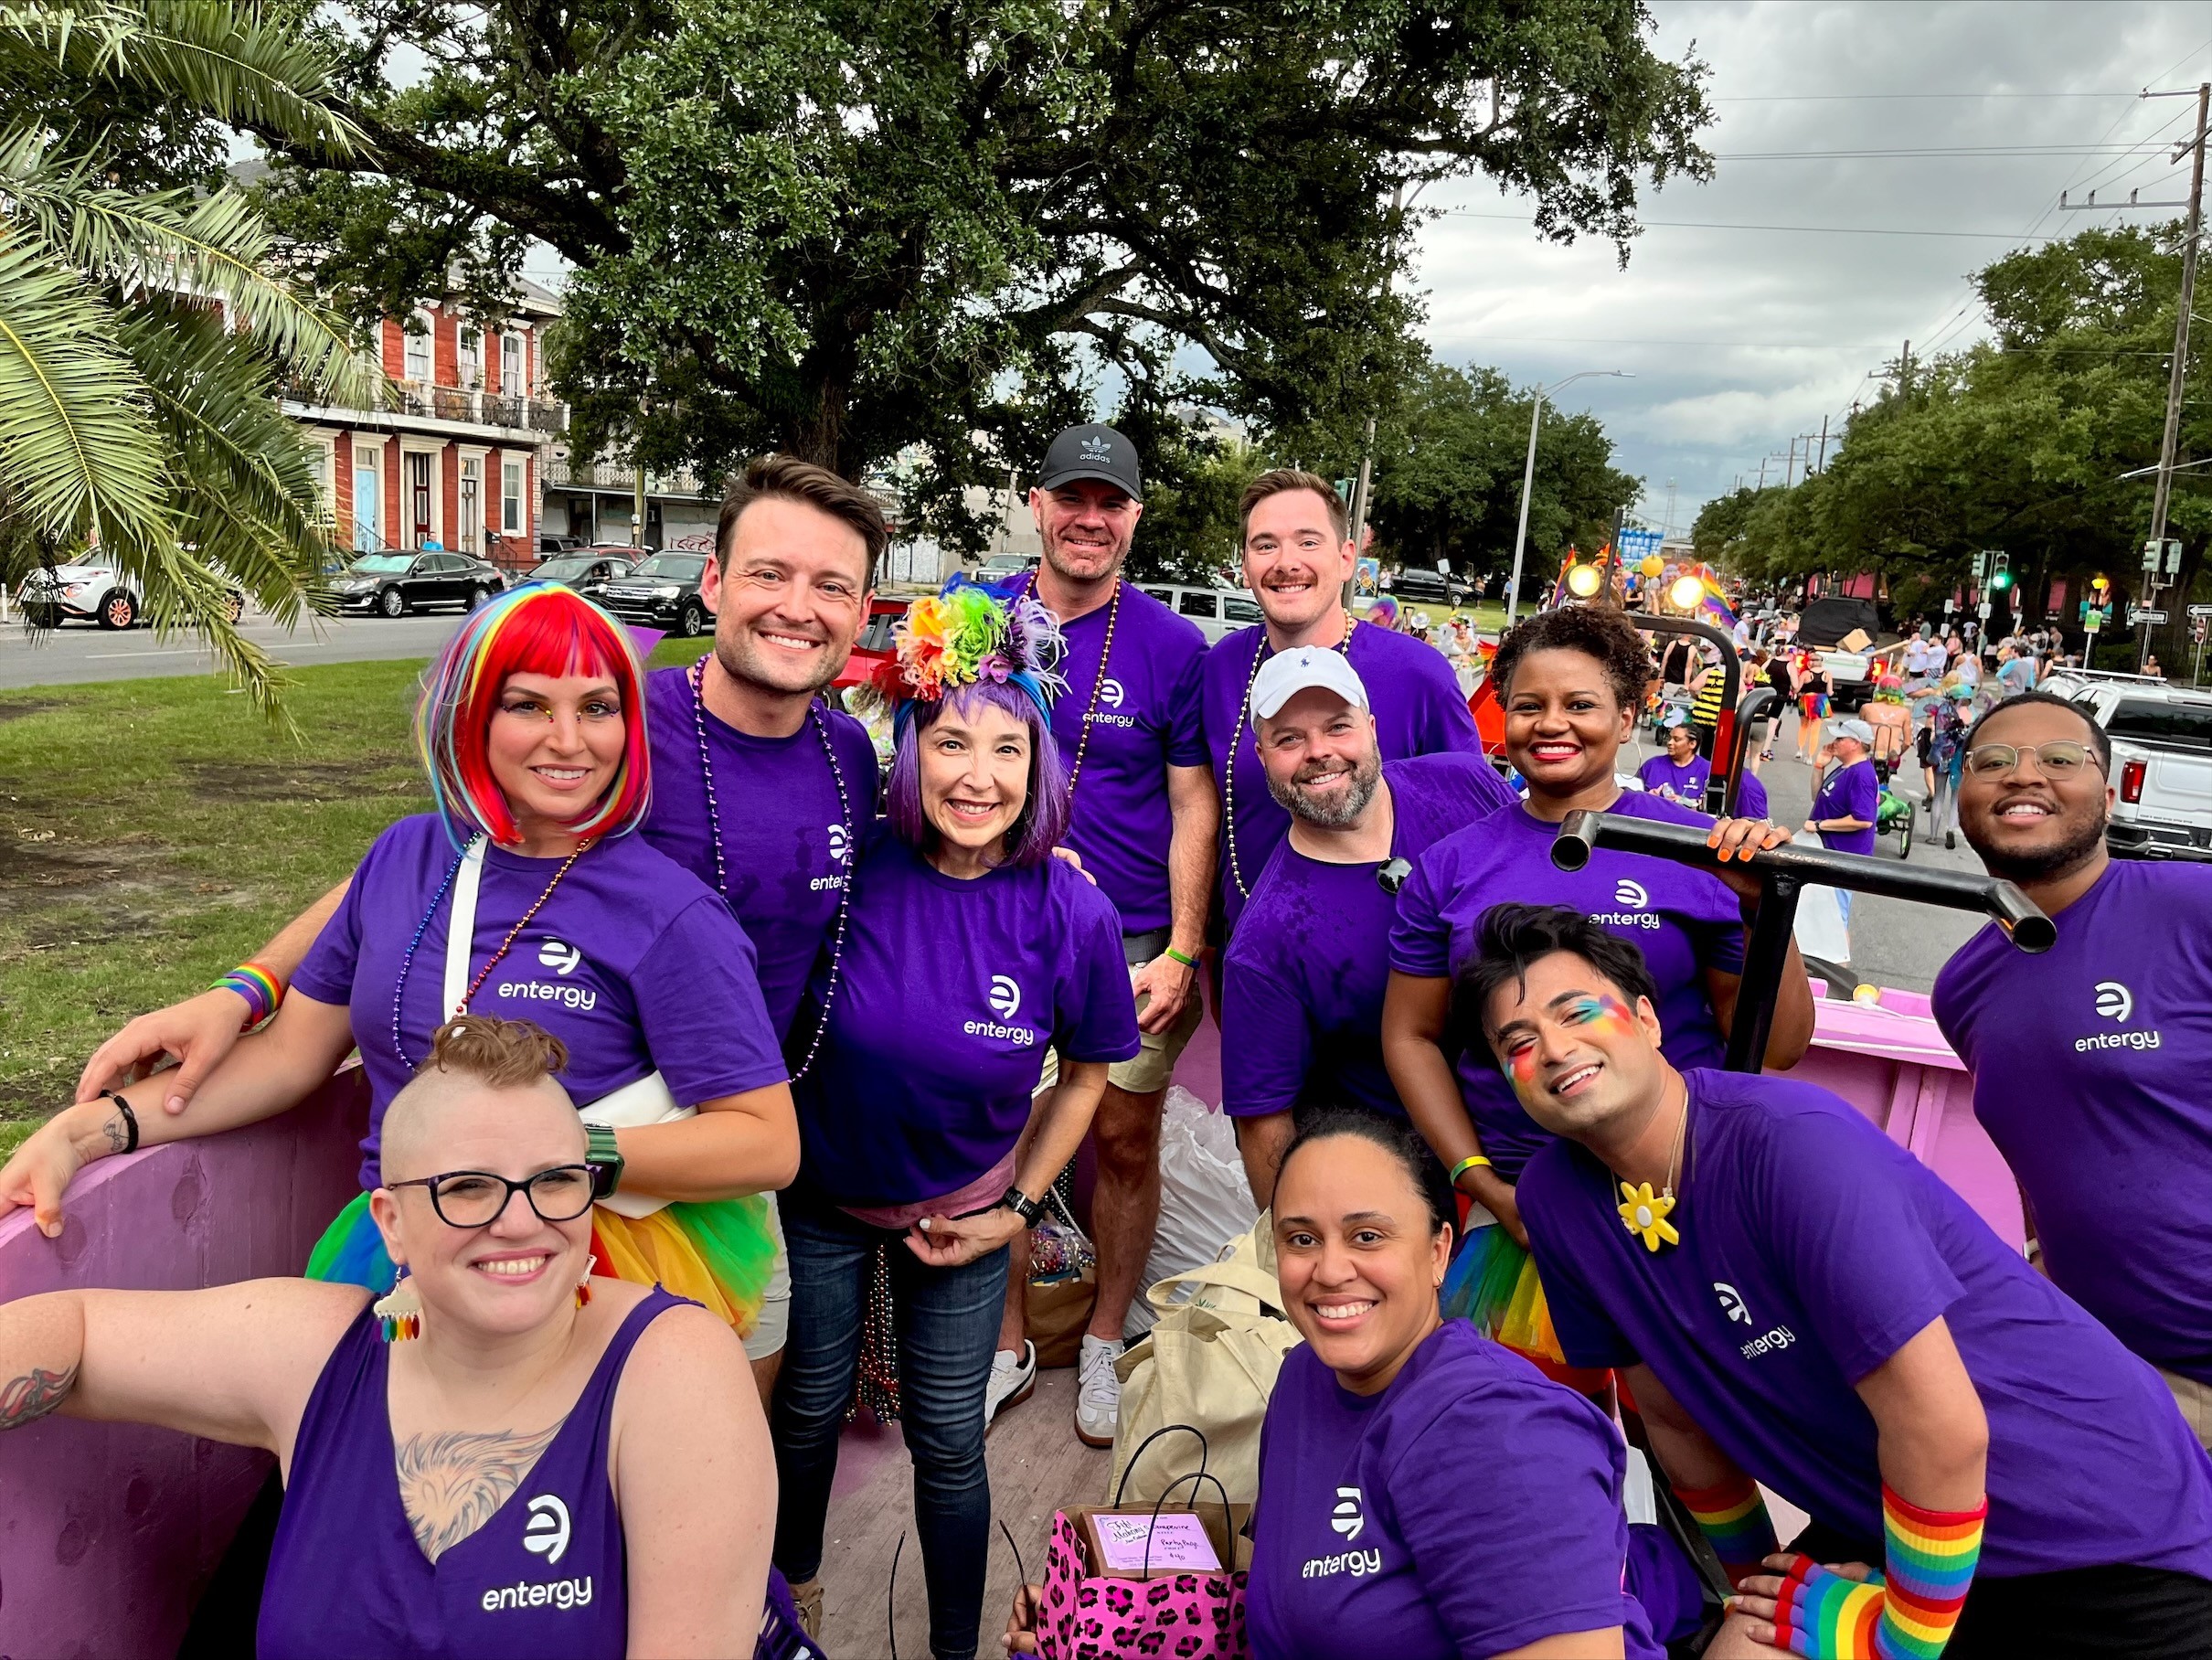 ENO President and CEO Deanna Rodriguez and Entergy employees at the New Orleans Pride Parade.